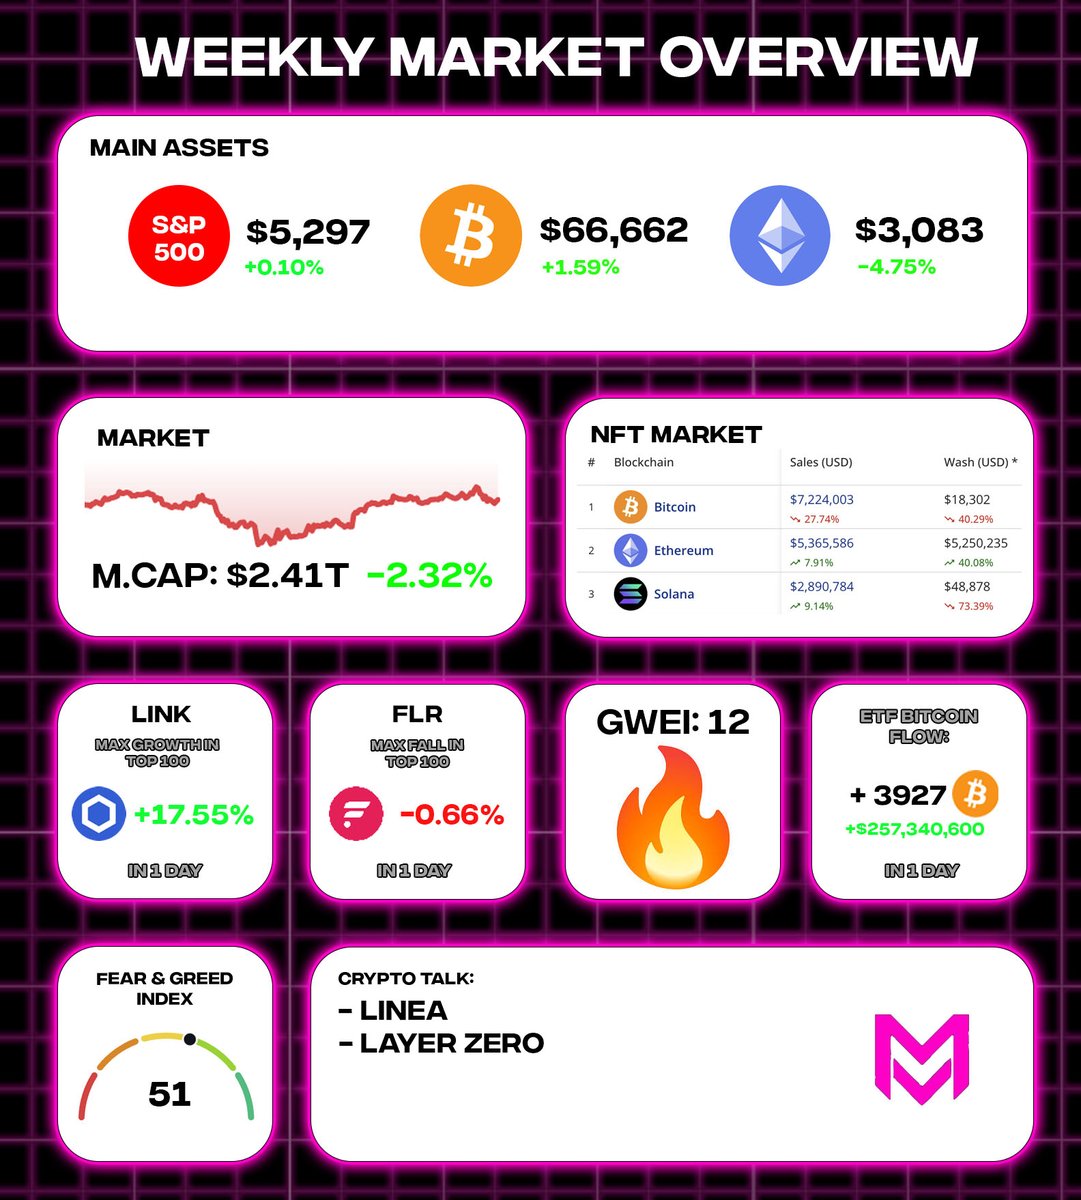 Daily Crypto Overview (May 16) Yesterday’s crypto highlights👇 🚨 NEWS: • Senate voted to repeal SEC's controversial crypto custody rule (SAB 121), Cynthia Lummis pushes a bill for regulated fintechs to store crypto • Hackers laundered $147M stolen from HTX through